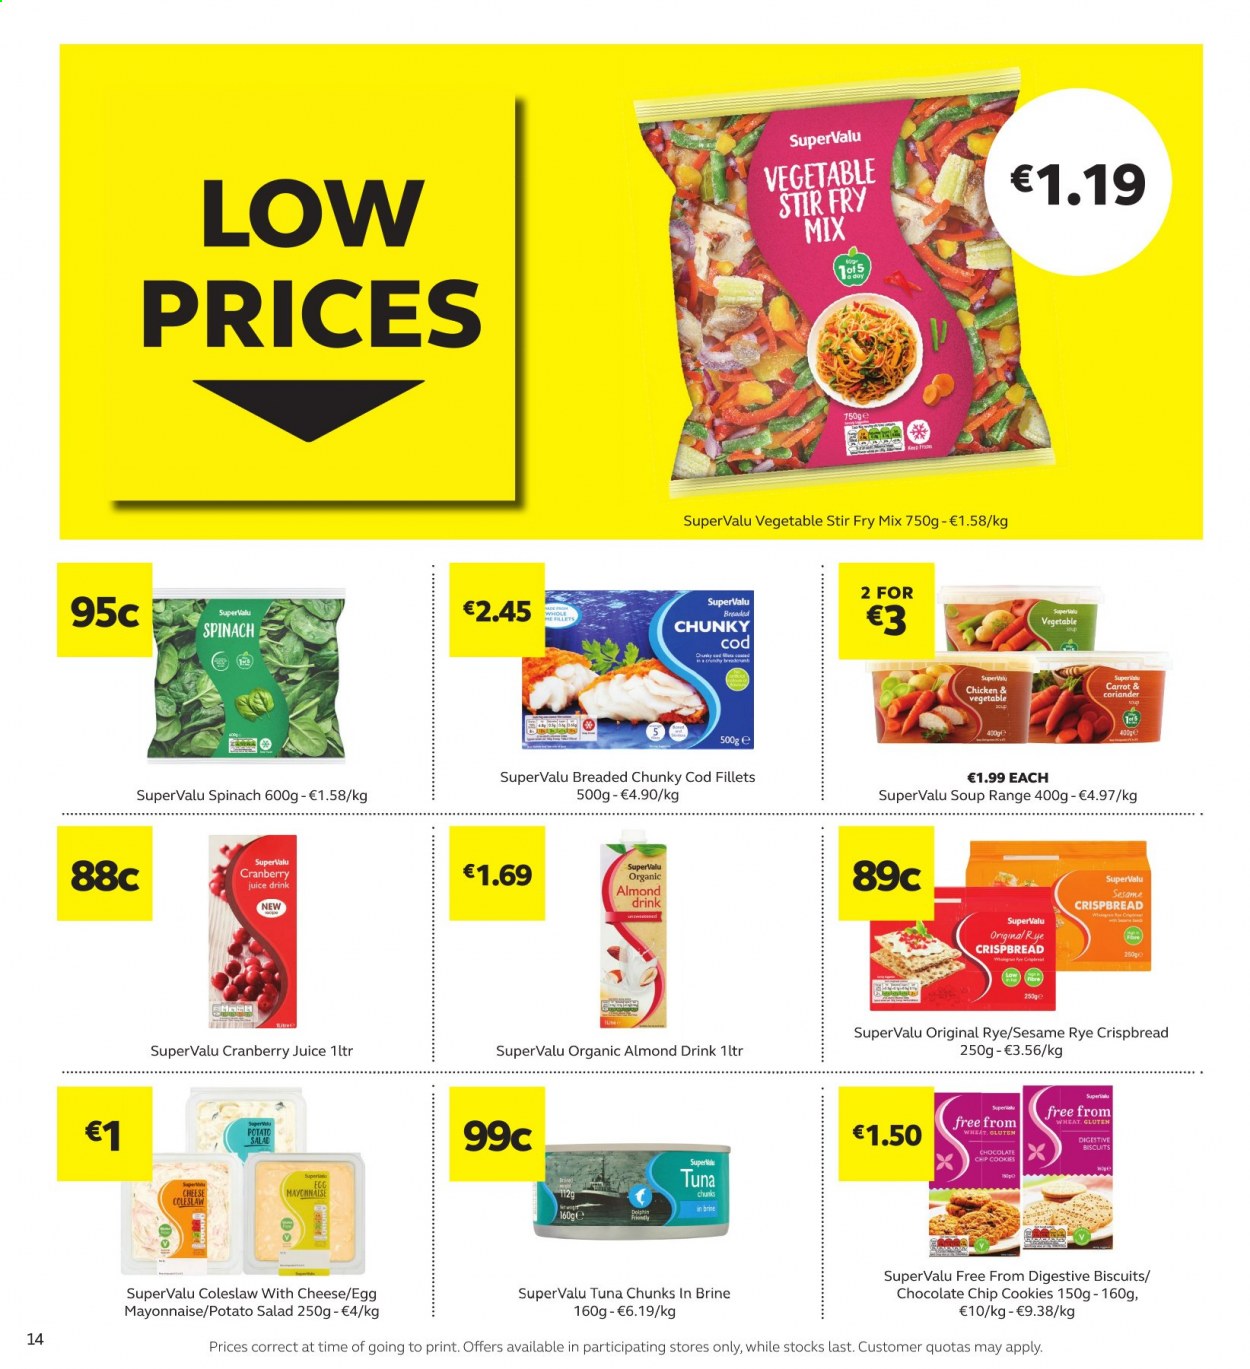 thumbnail - SuperValu offer  - 07.01.2021 - 20.01.2021 - Sales products - rye crispbread, crispbread, spinach, salad, cod, tuna, coleslaw, soup, potato salad, cheese, eggs, mayonnaise, cookies, biscuit, Digestive, coriander, almonds, cranberry juice, juice. Page 14.